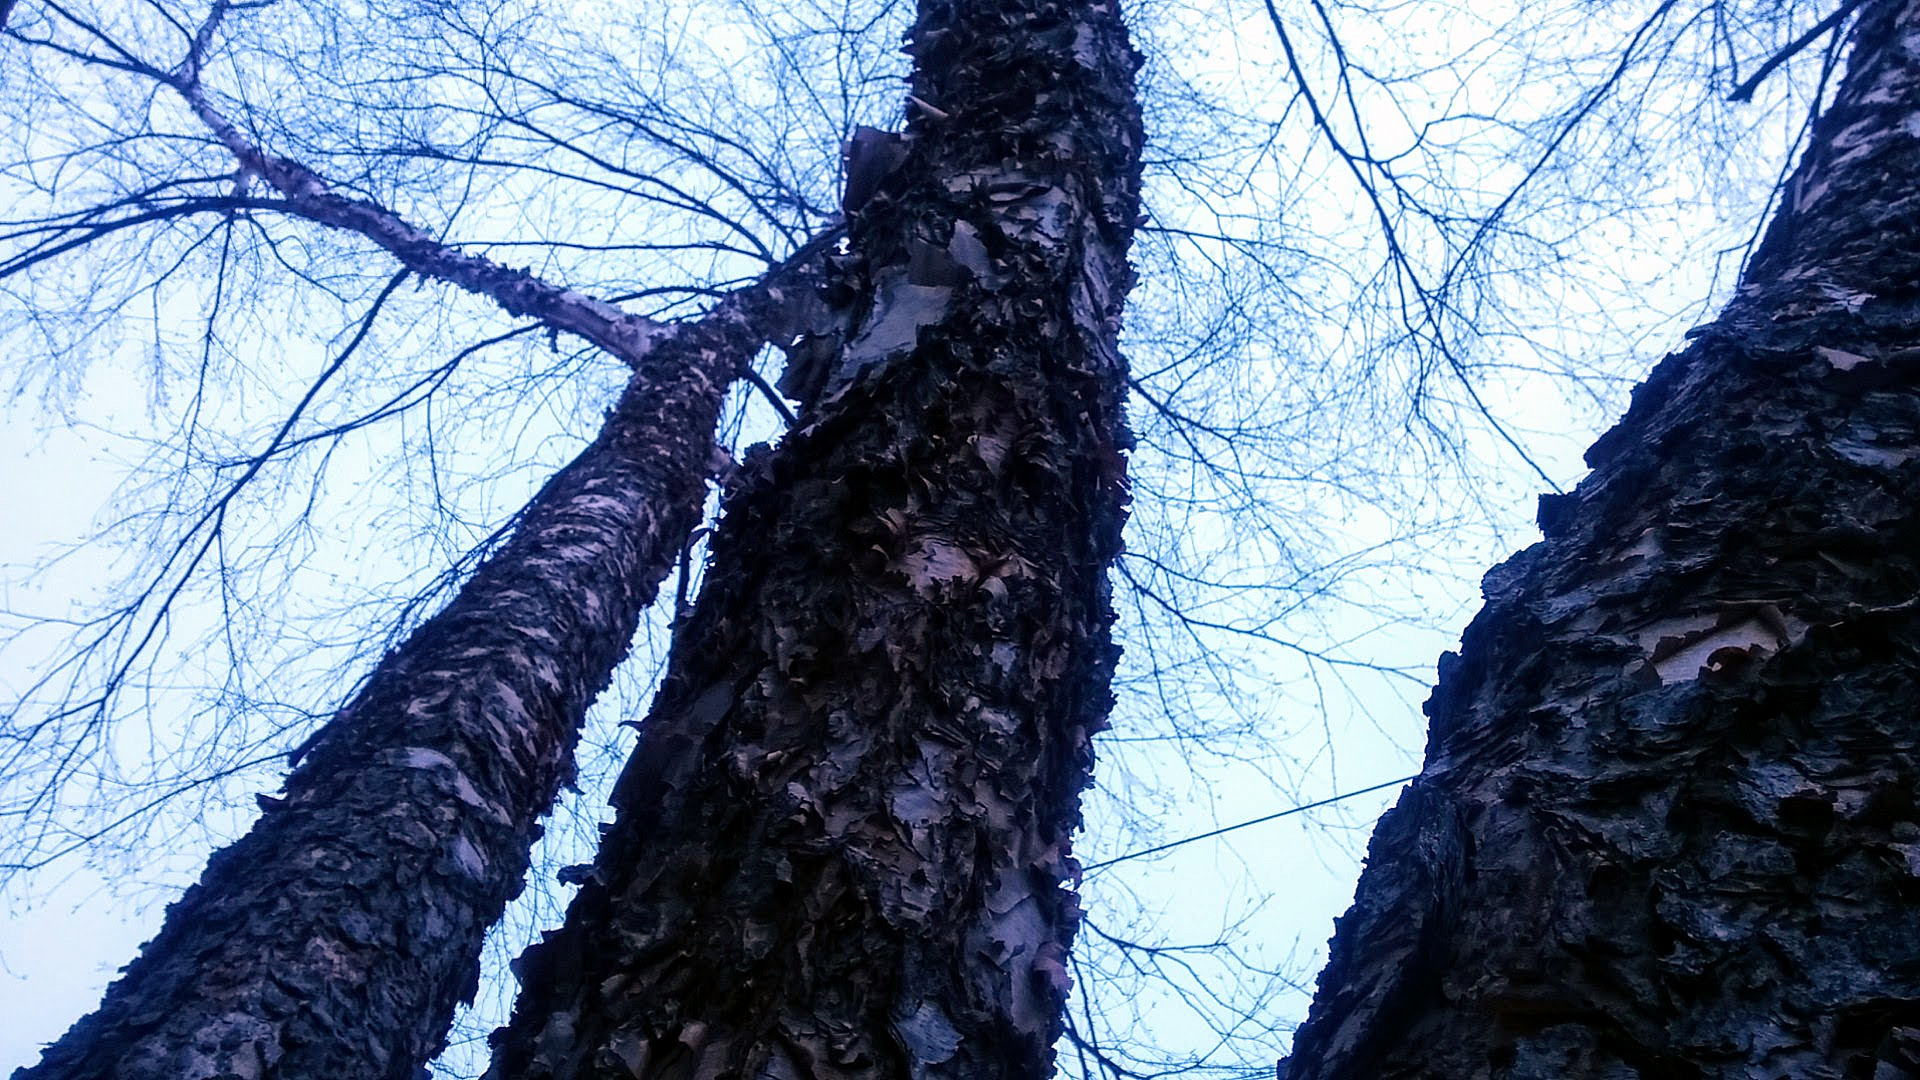 Looking up at tall birch trees with peeling barks. Photo taken in Winter, so there are no leaves on the branches. The barks of three trees are in the foreground. Some branches can be seen extending from the treetops which are not in view.